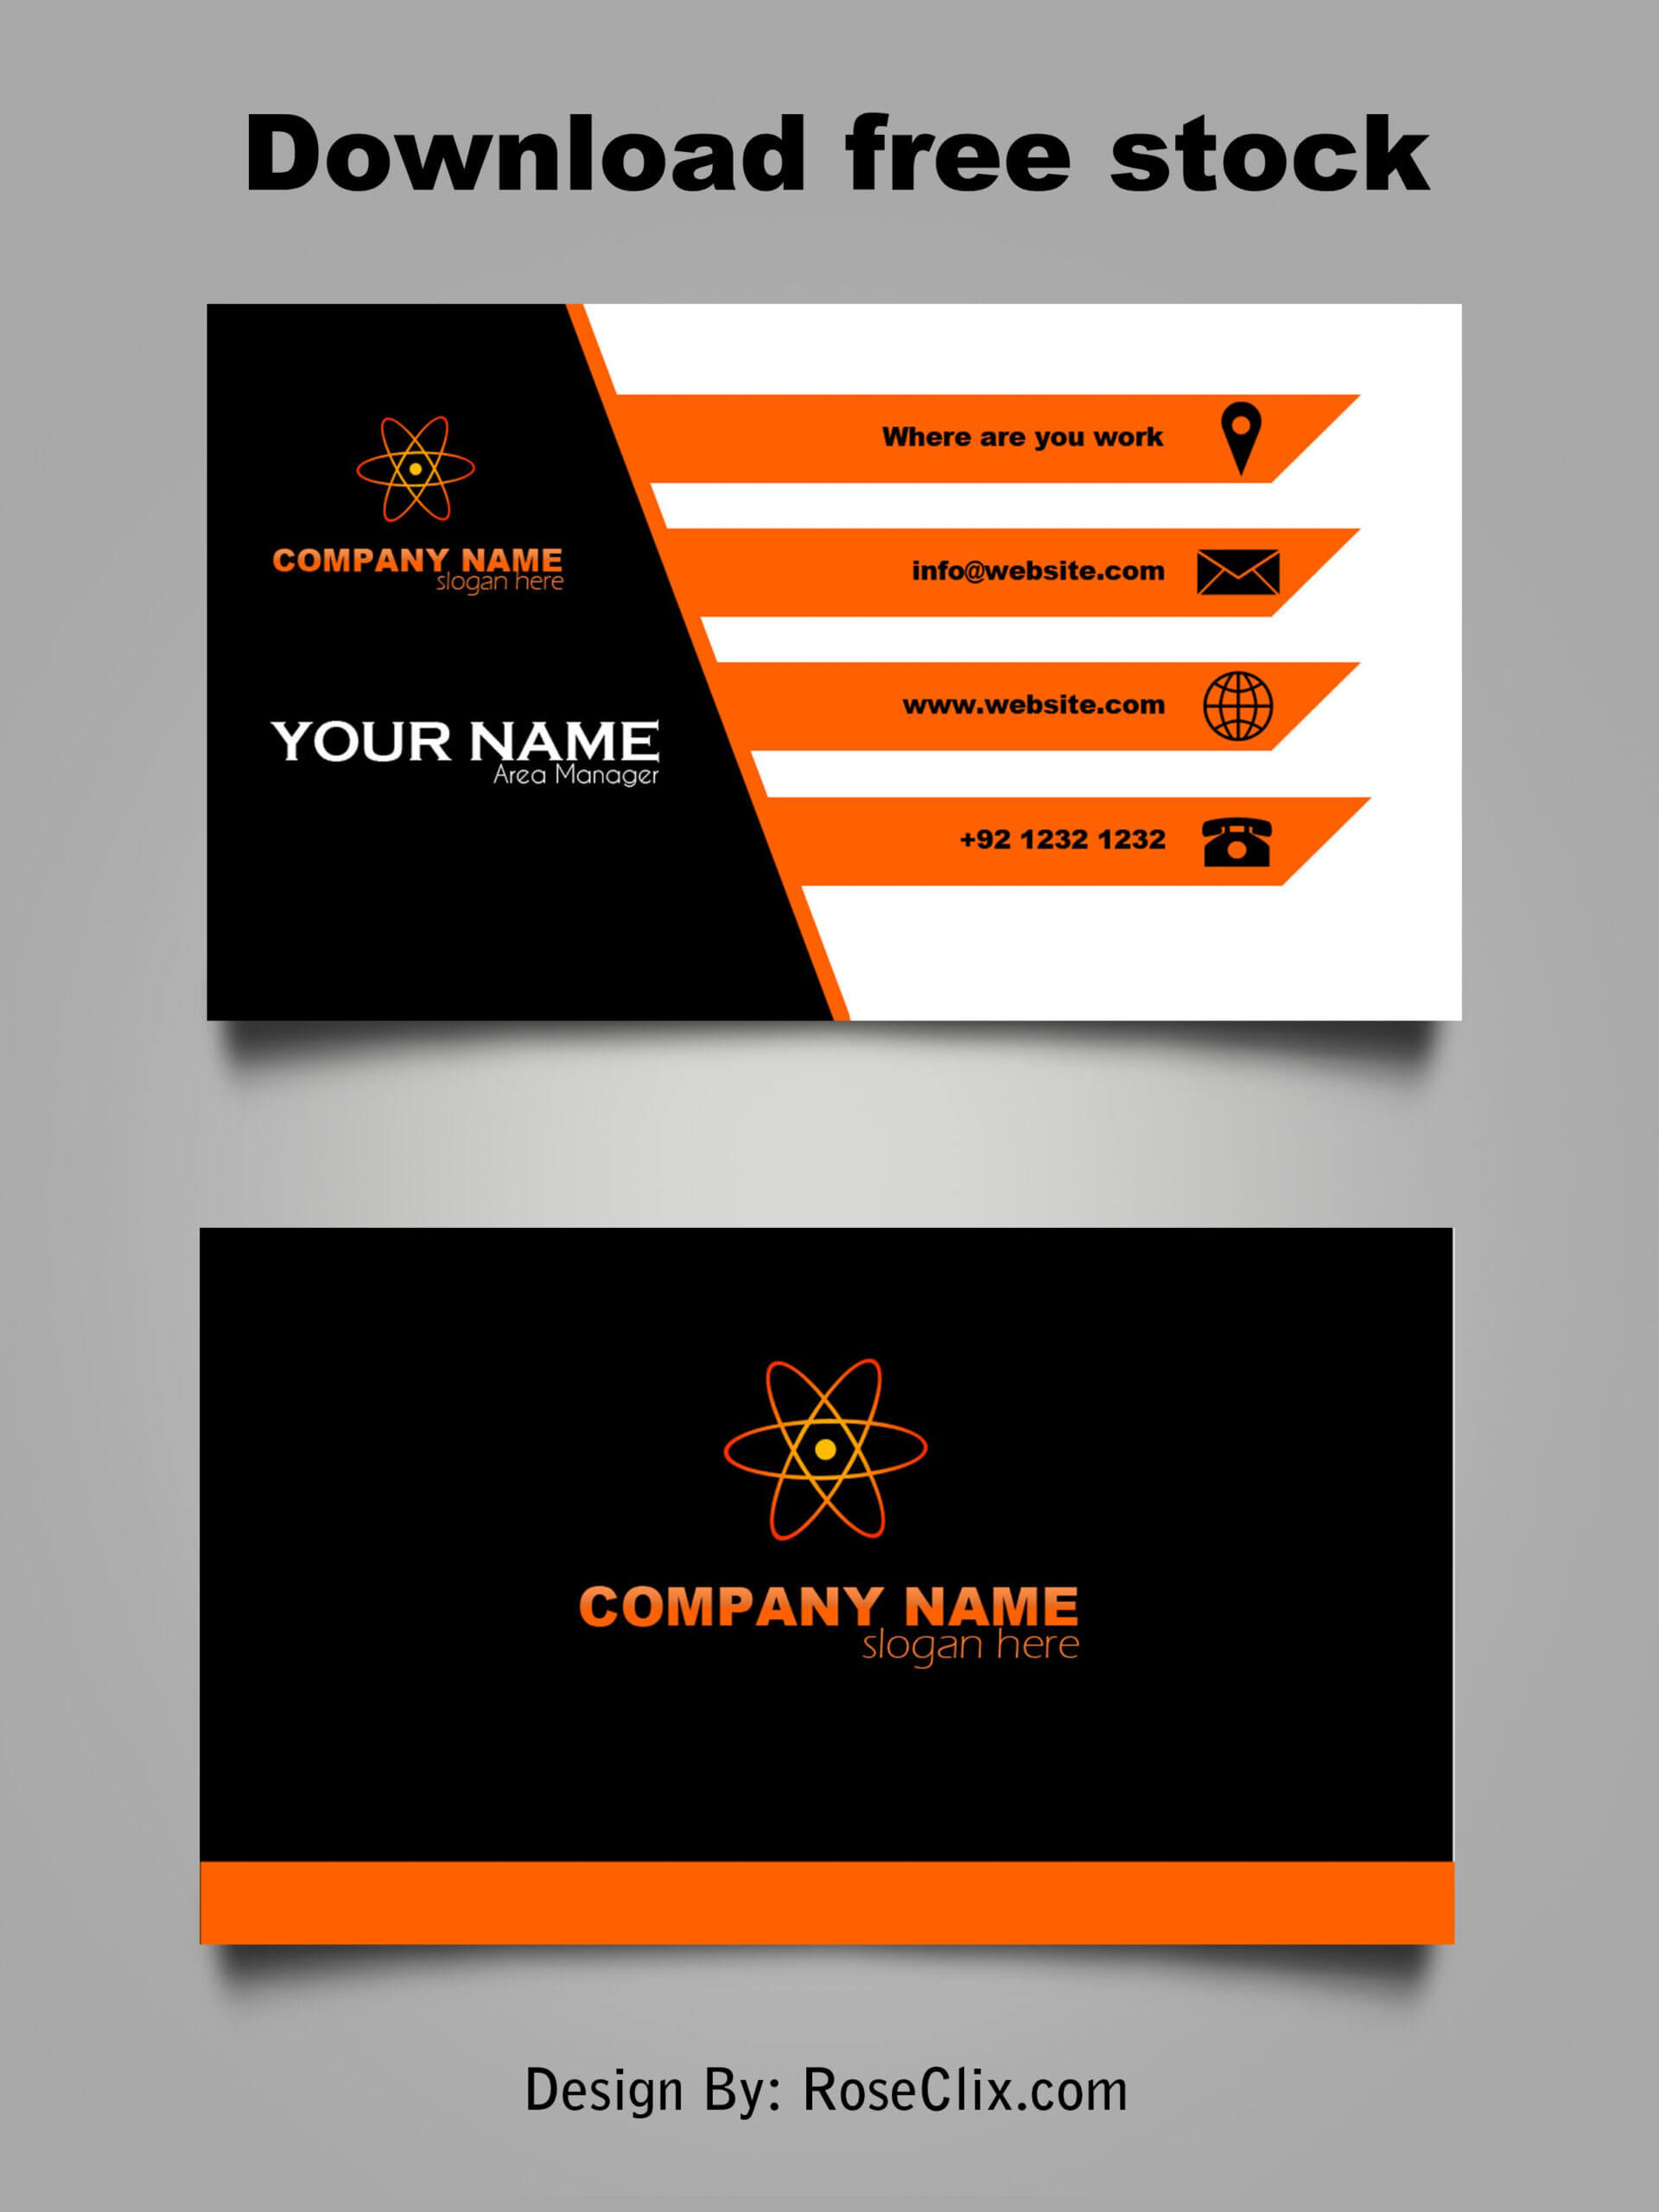 001 Free Downloadable Business Card Template Fantastic Ideas Pertaining To Word 2013 Business Card Template